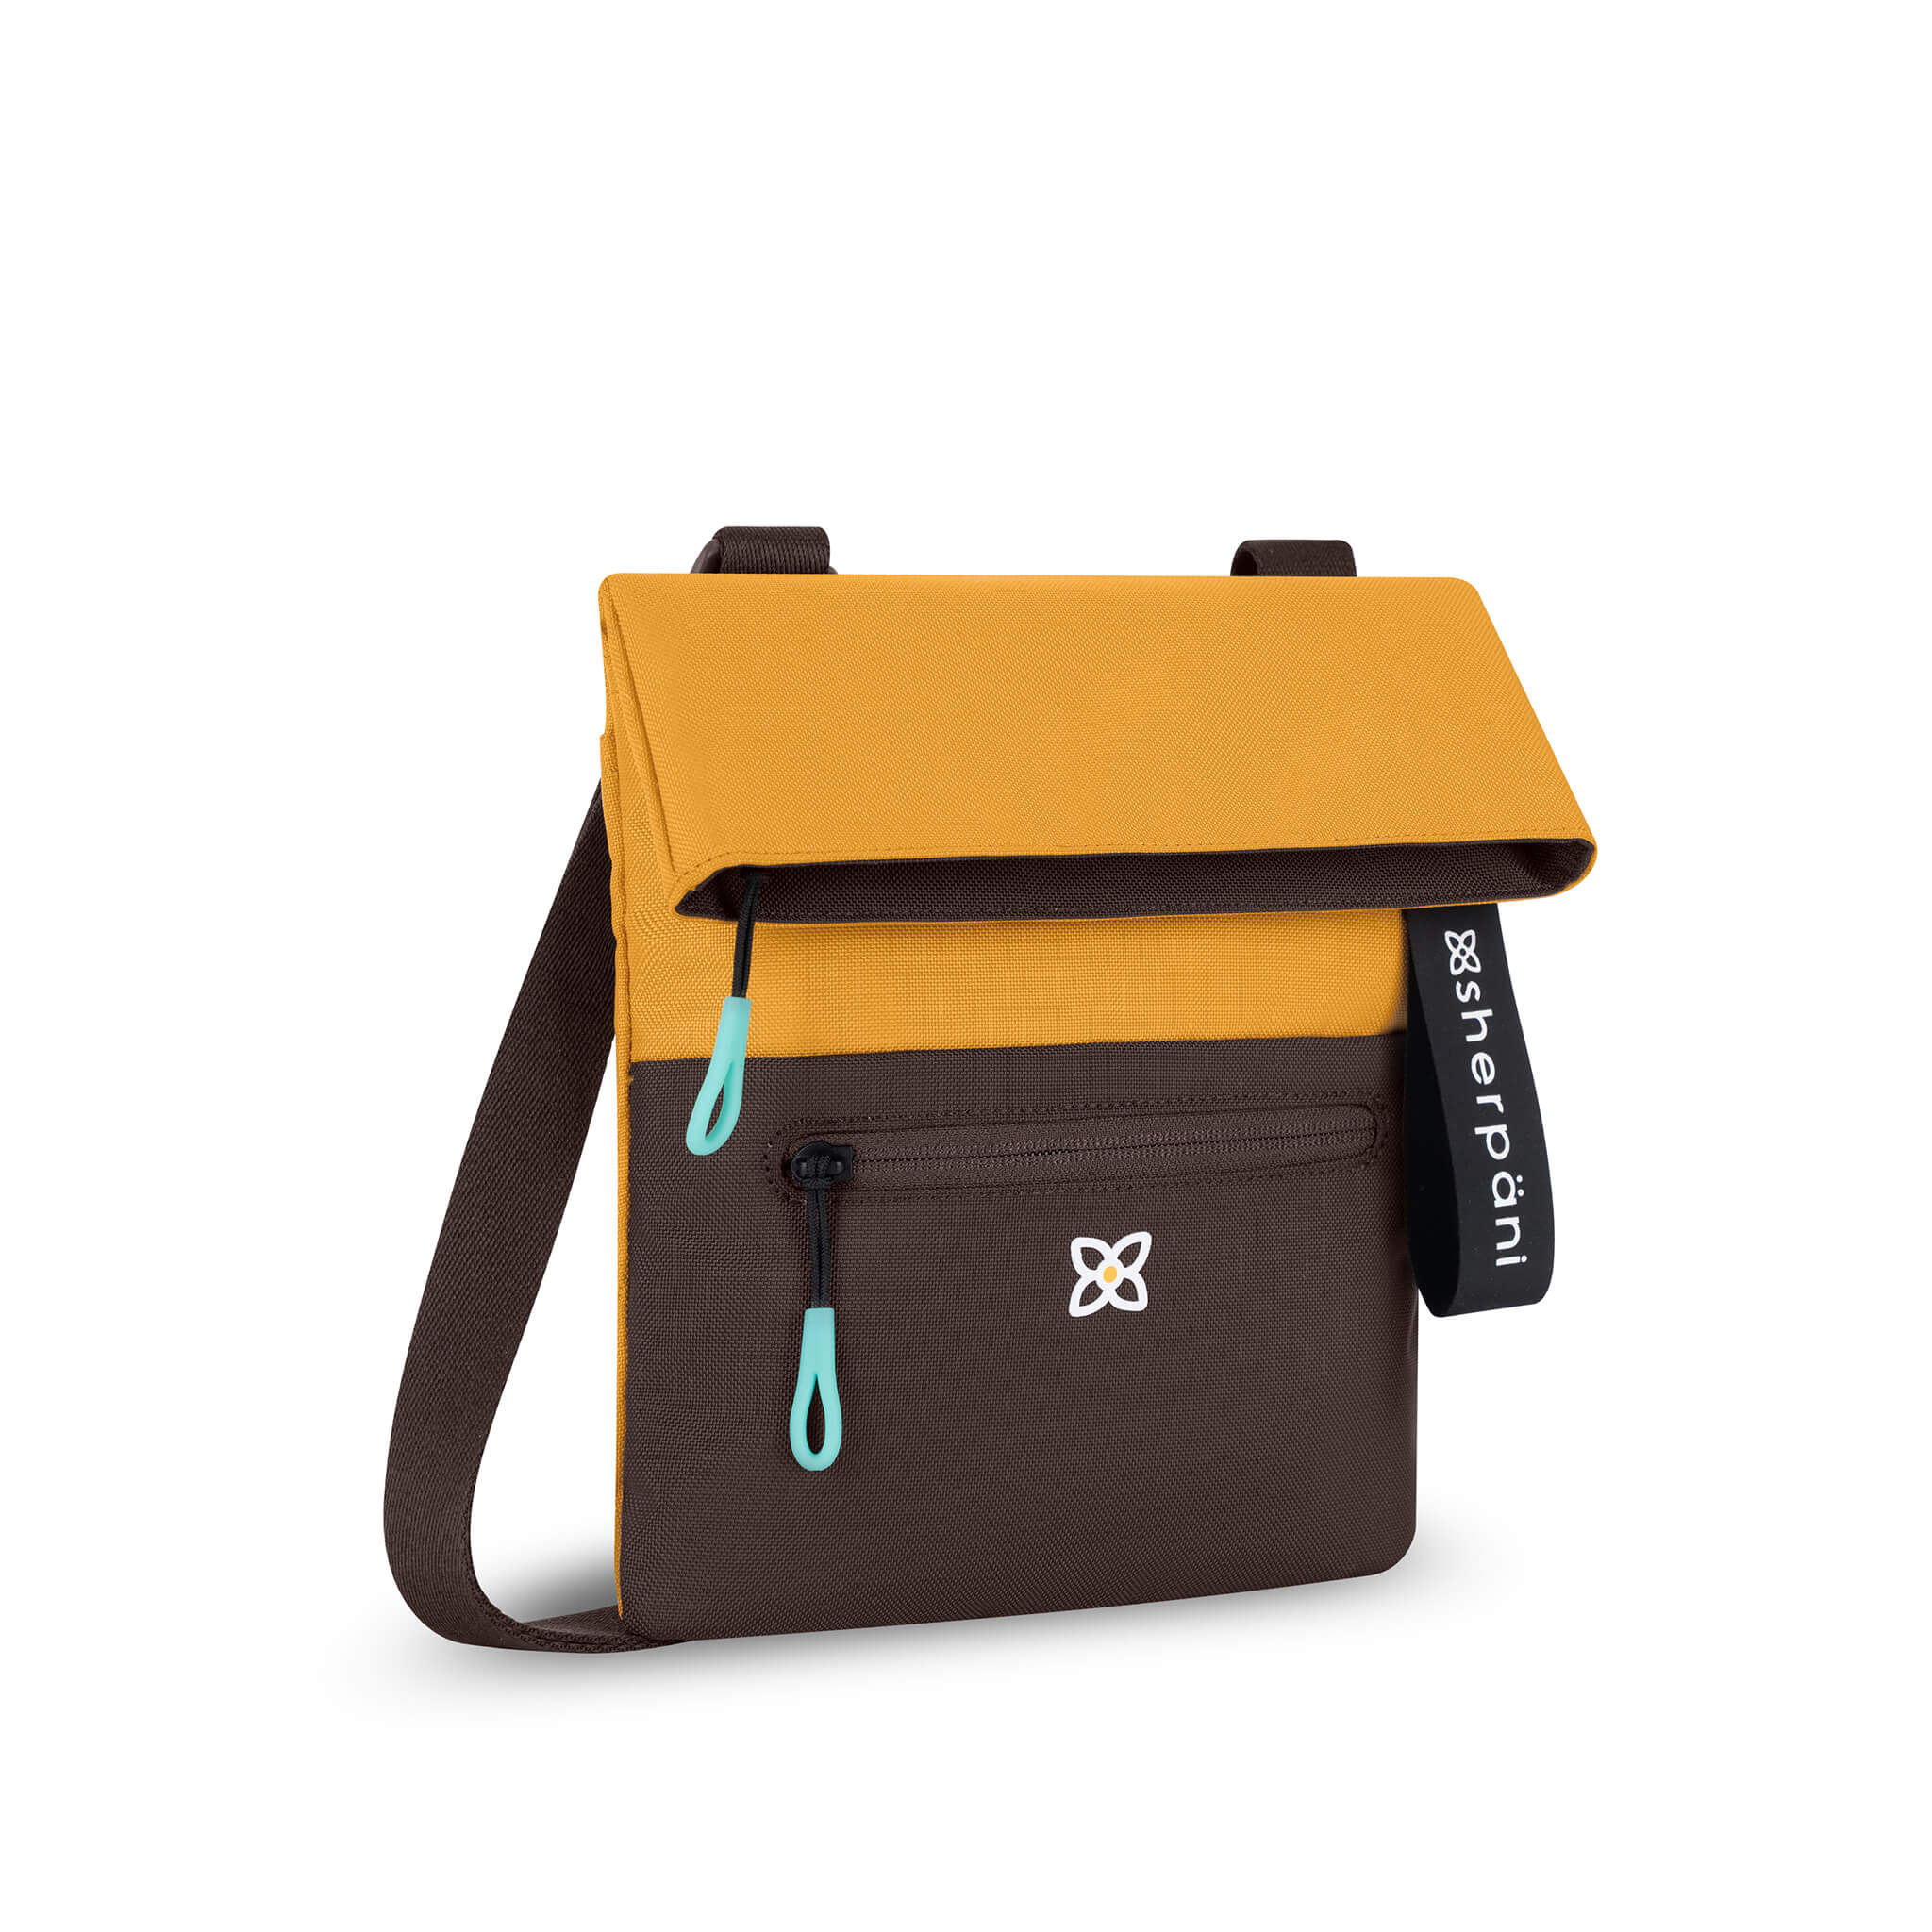 Angled front view of Sherpani fold over crossbody bag, the Pica in Sundial. Pica features include an adjustable crossbody strap, outside zipper pocket, back flap pocket, inside zipper pocket and slip pocket, detachable keychain and RFID protection. The Sundial coloway is two-toned in yellow and dark brown with turquoise accents. 